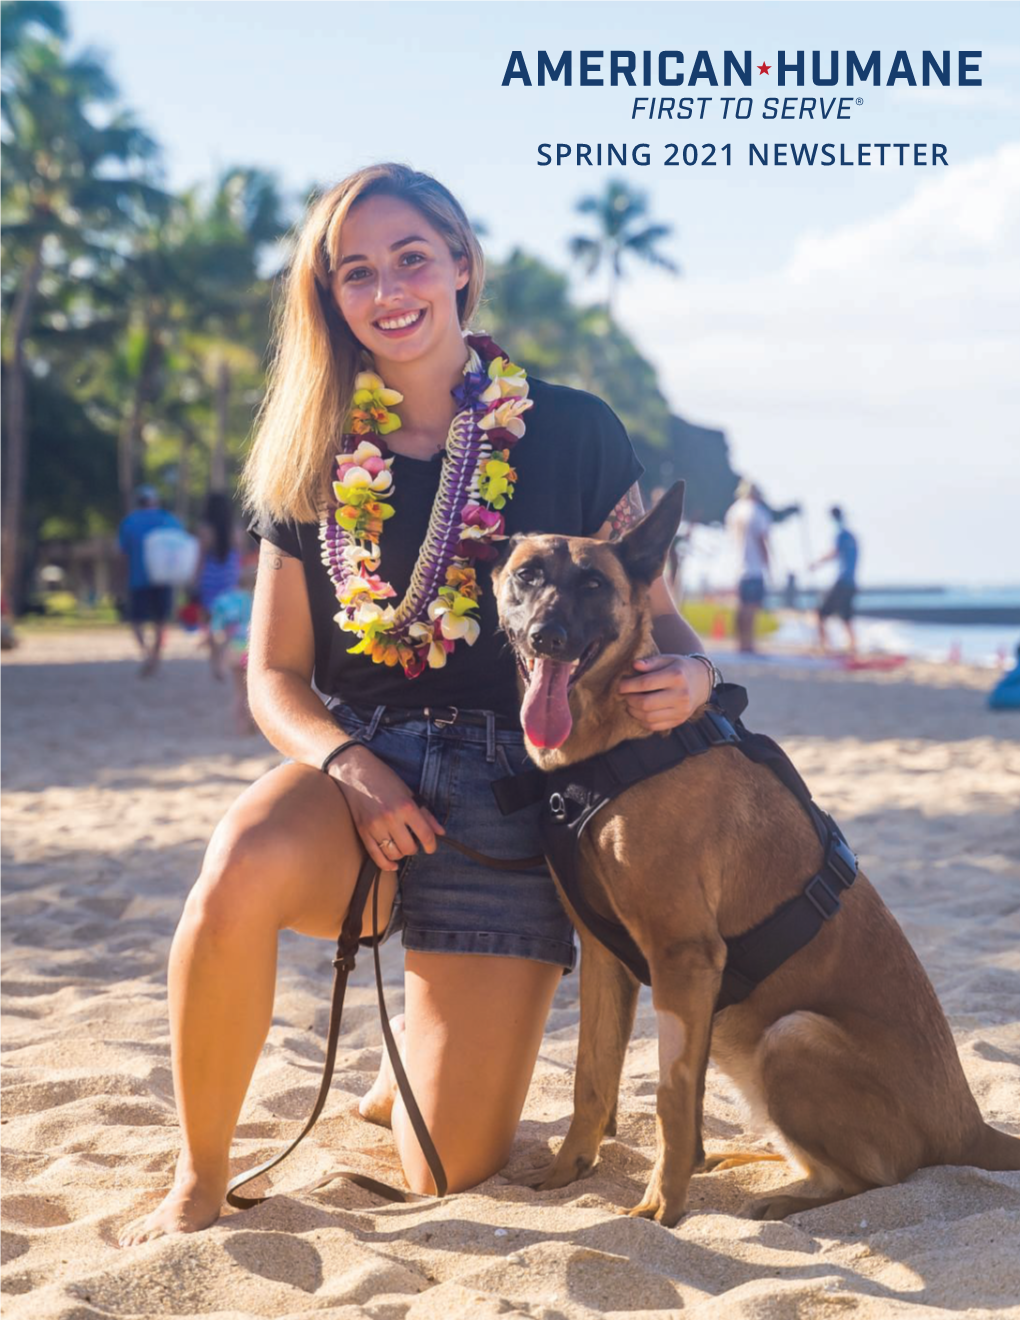 Spring 2021 Newsletter from the President and Ceo Rescue Tails